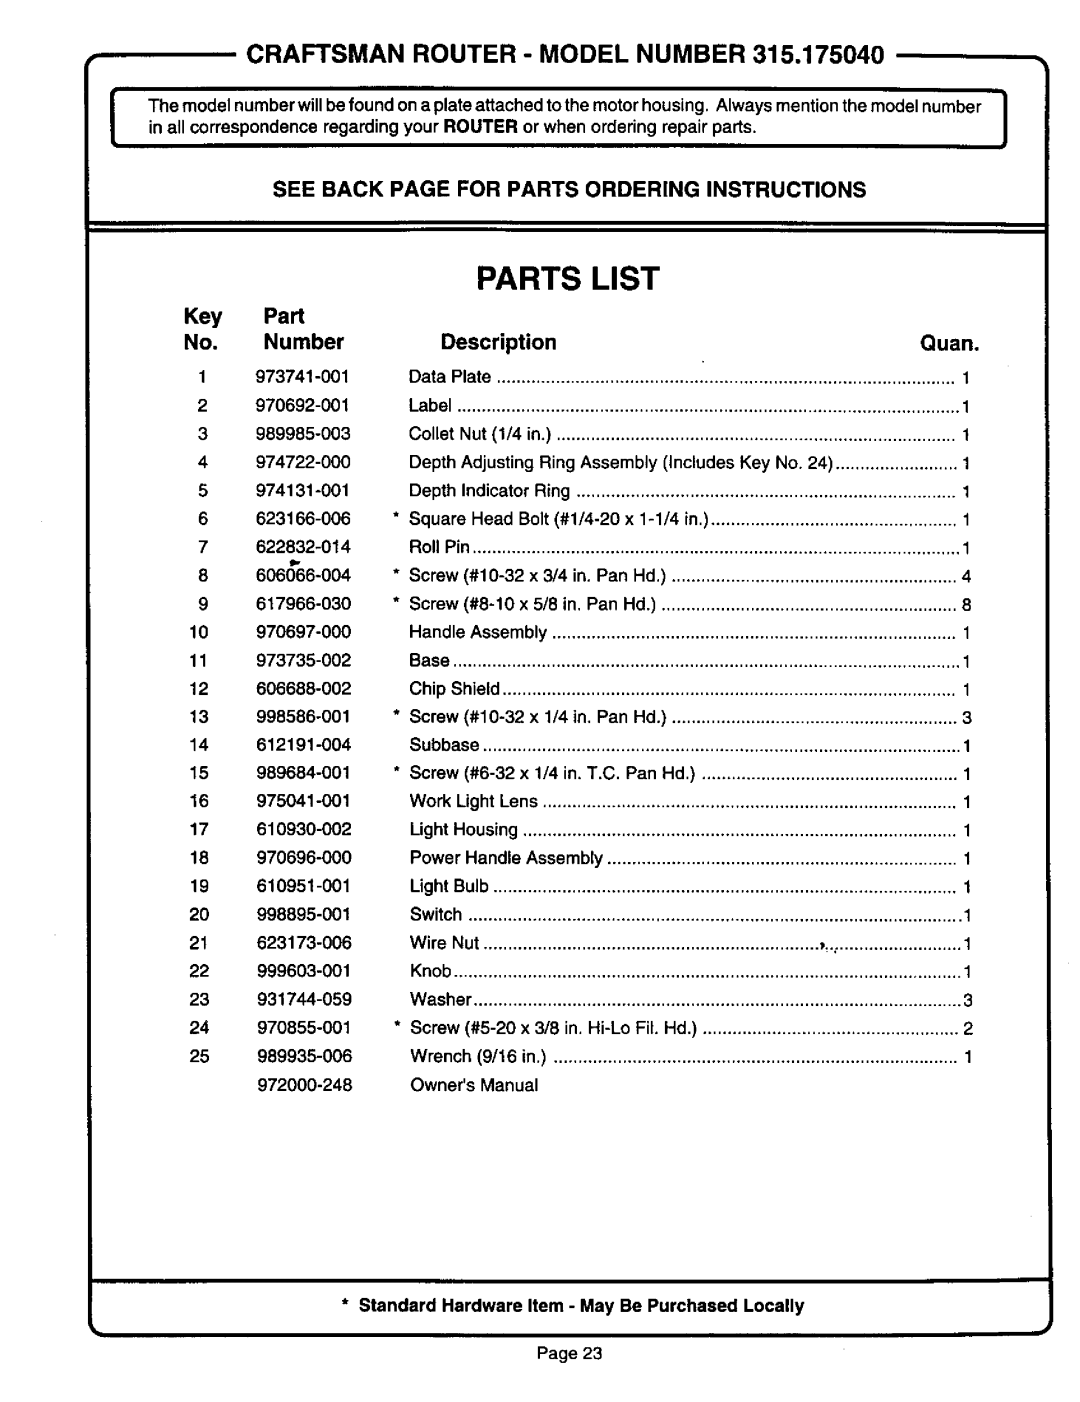 Sears 315.17506, 315.17504, 315.17505 owner manual Parts List, Craftsman Router - Model Number, Key Part No. Number 